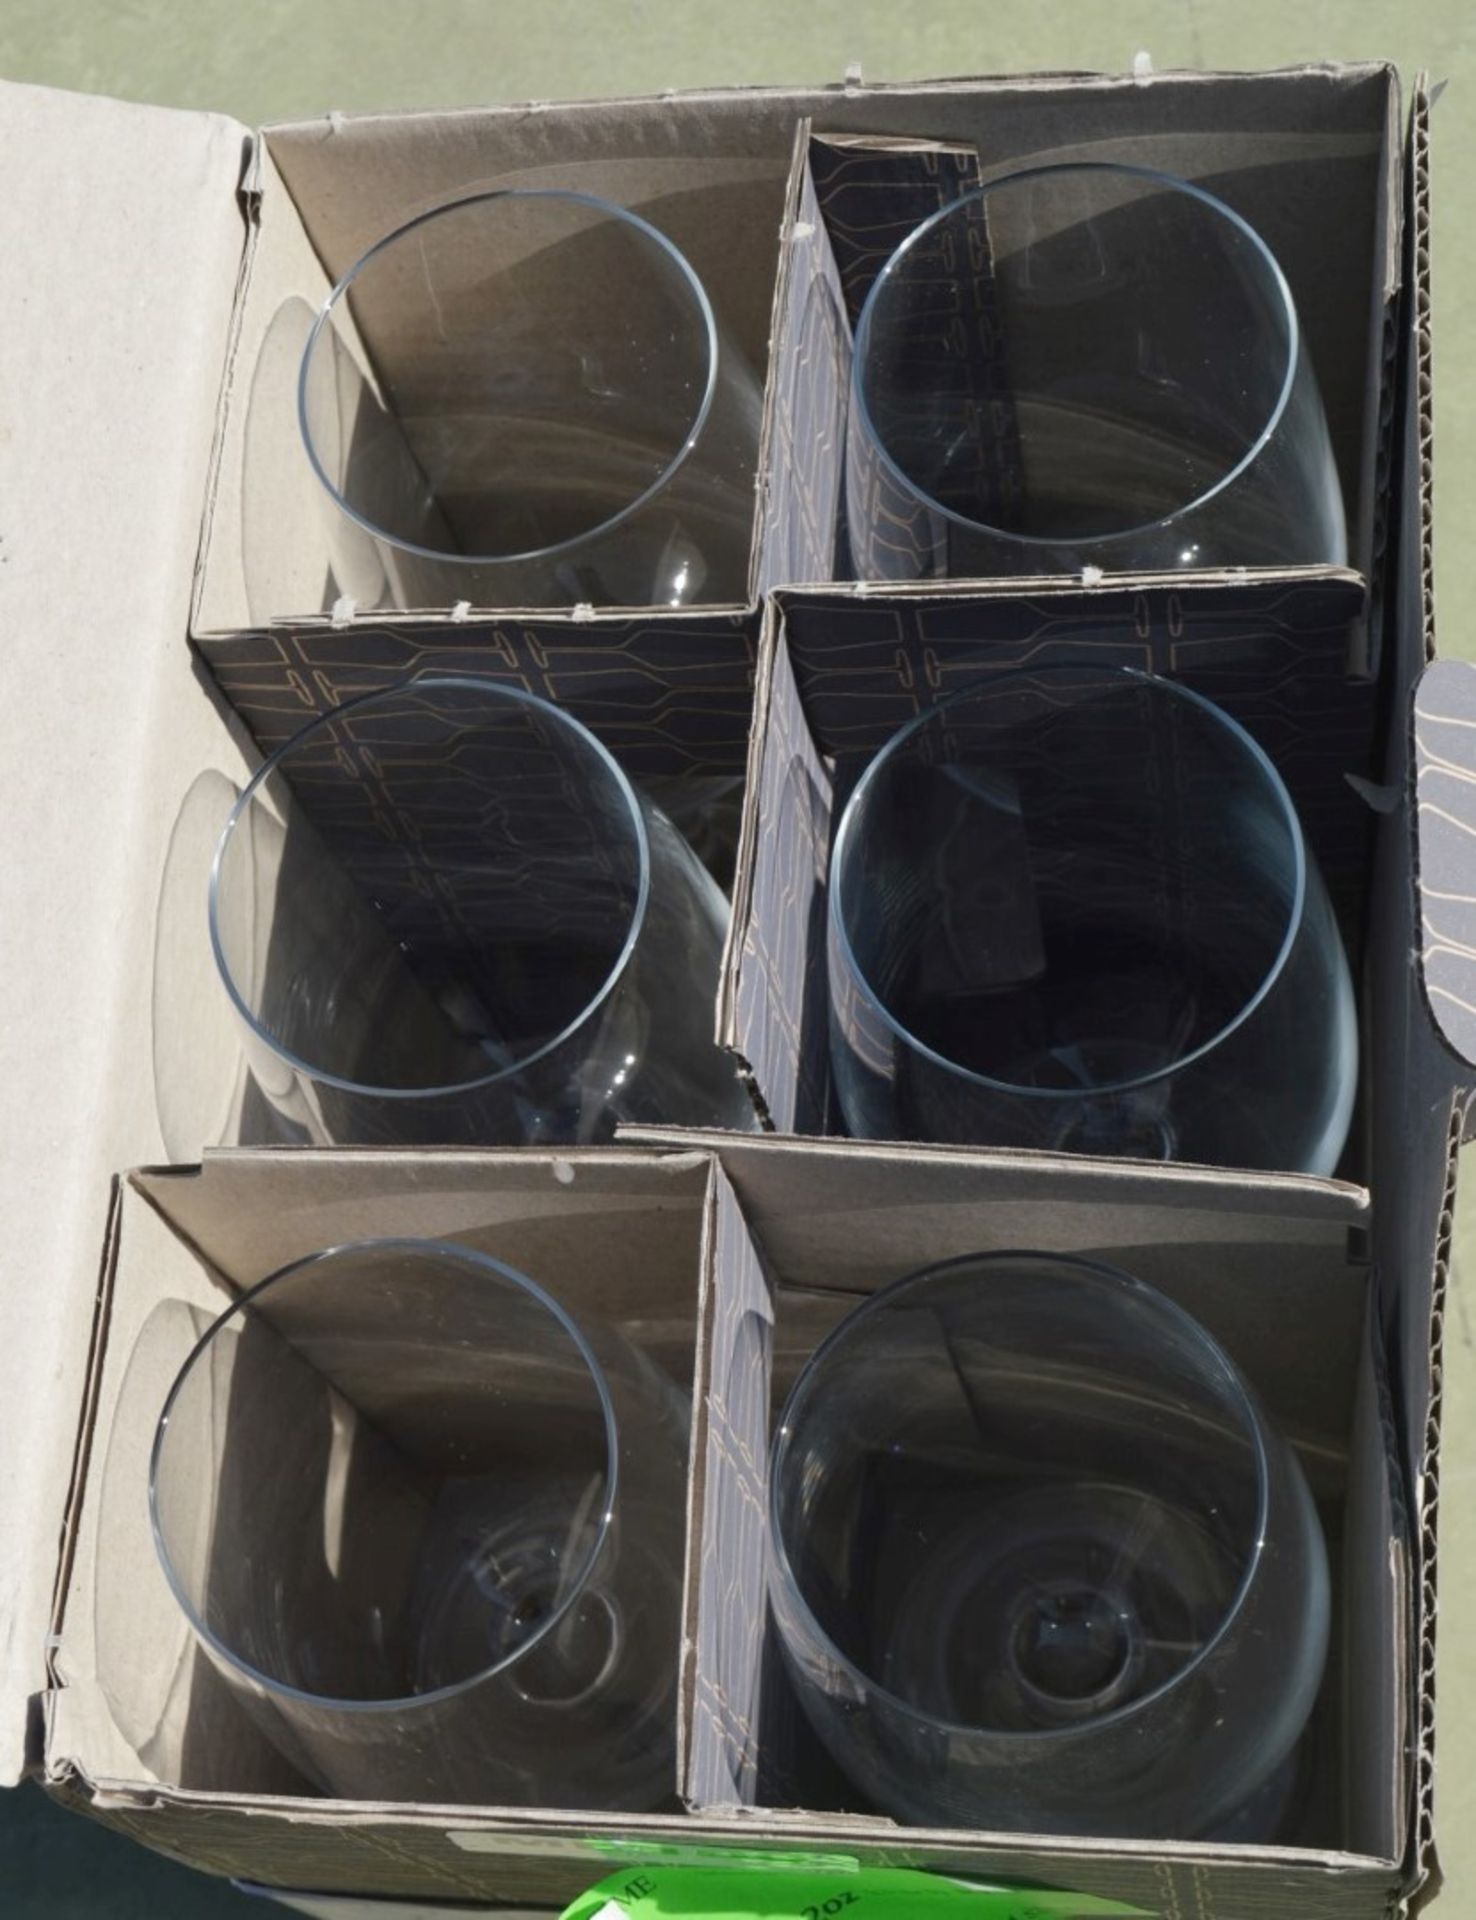 3 x Boxes Of SCHOTT ZWIESEL 'Congresso' Commercial Crystal Red Wine Glasses 355ml - 18 x Glasses - Image 4 of 6